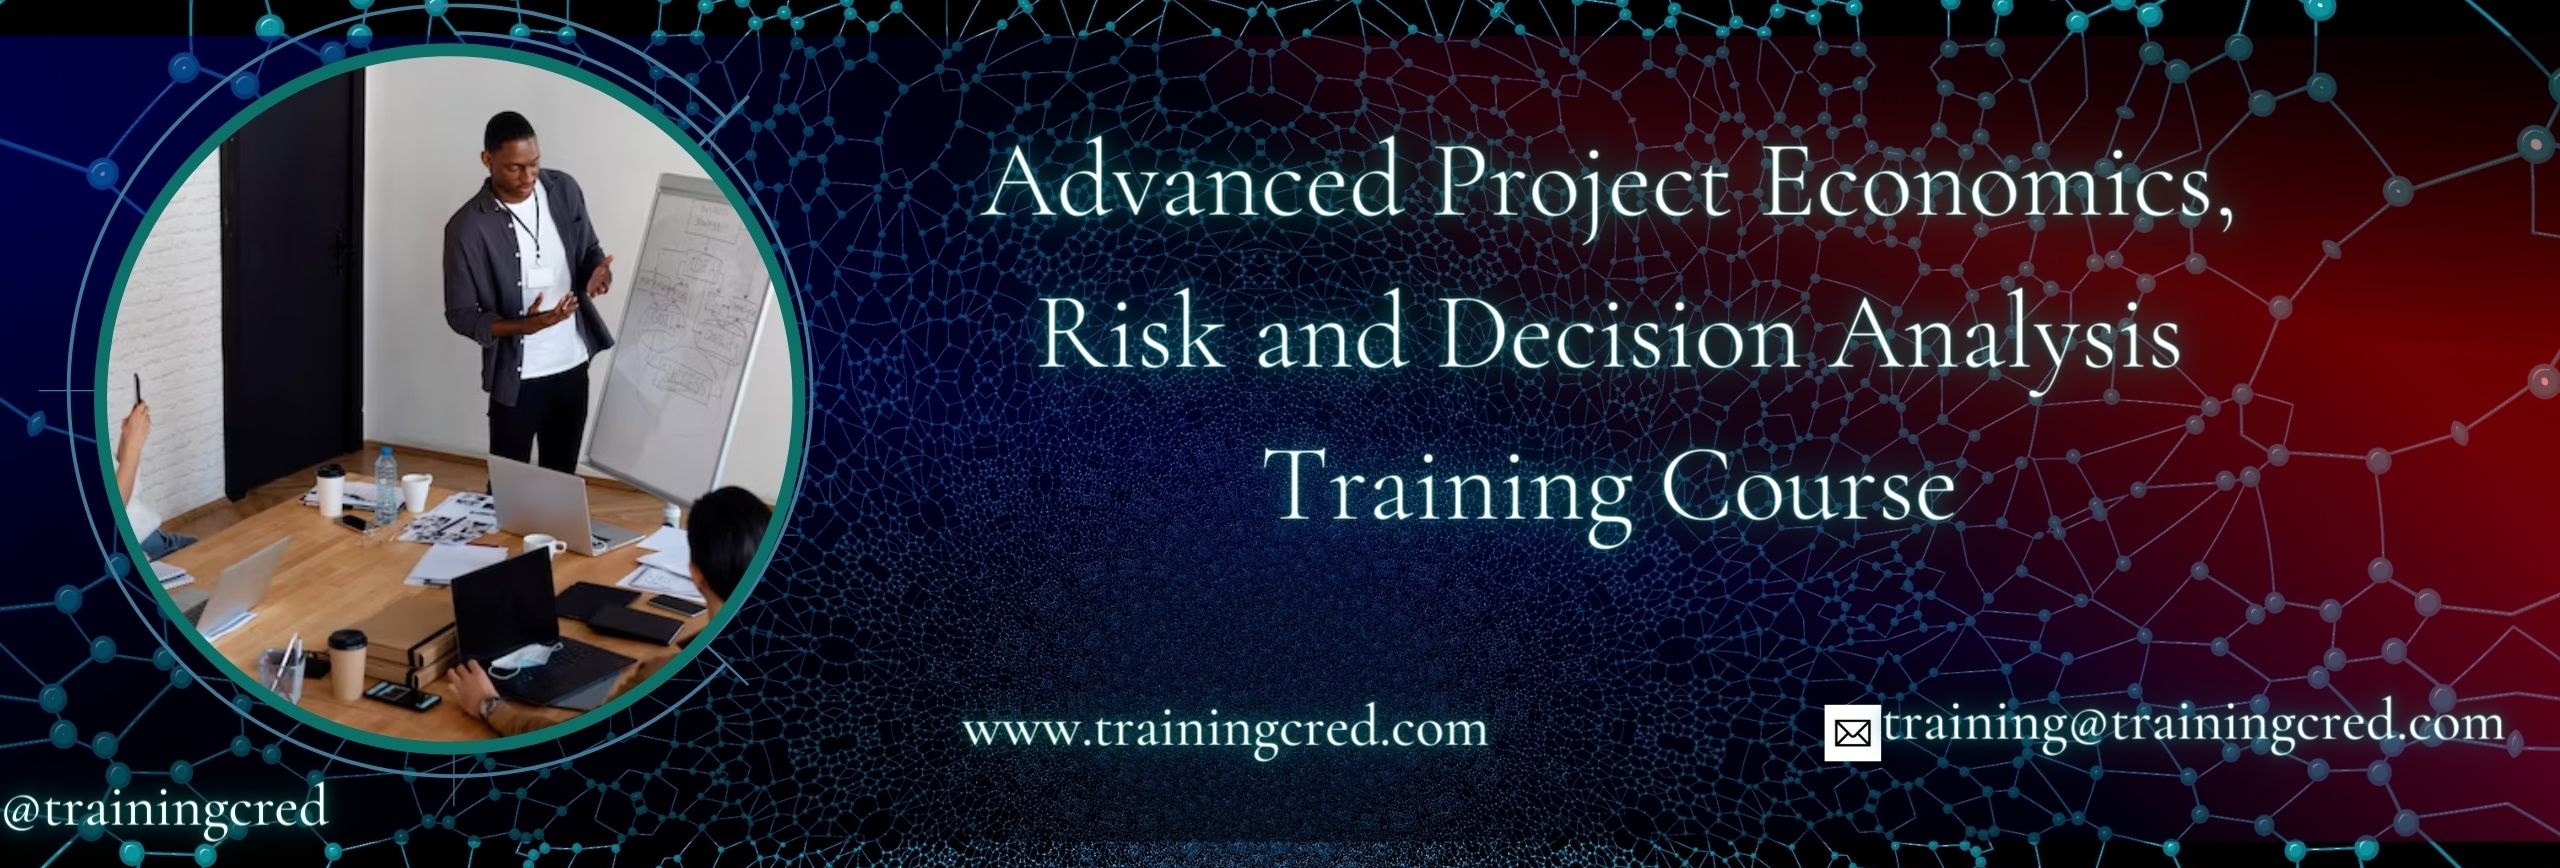 Advanced Project Economics, Risk and Decision Analysis Training